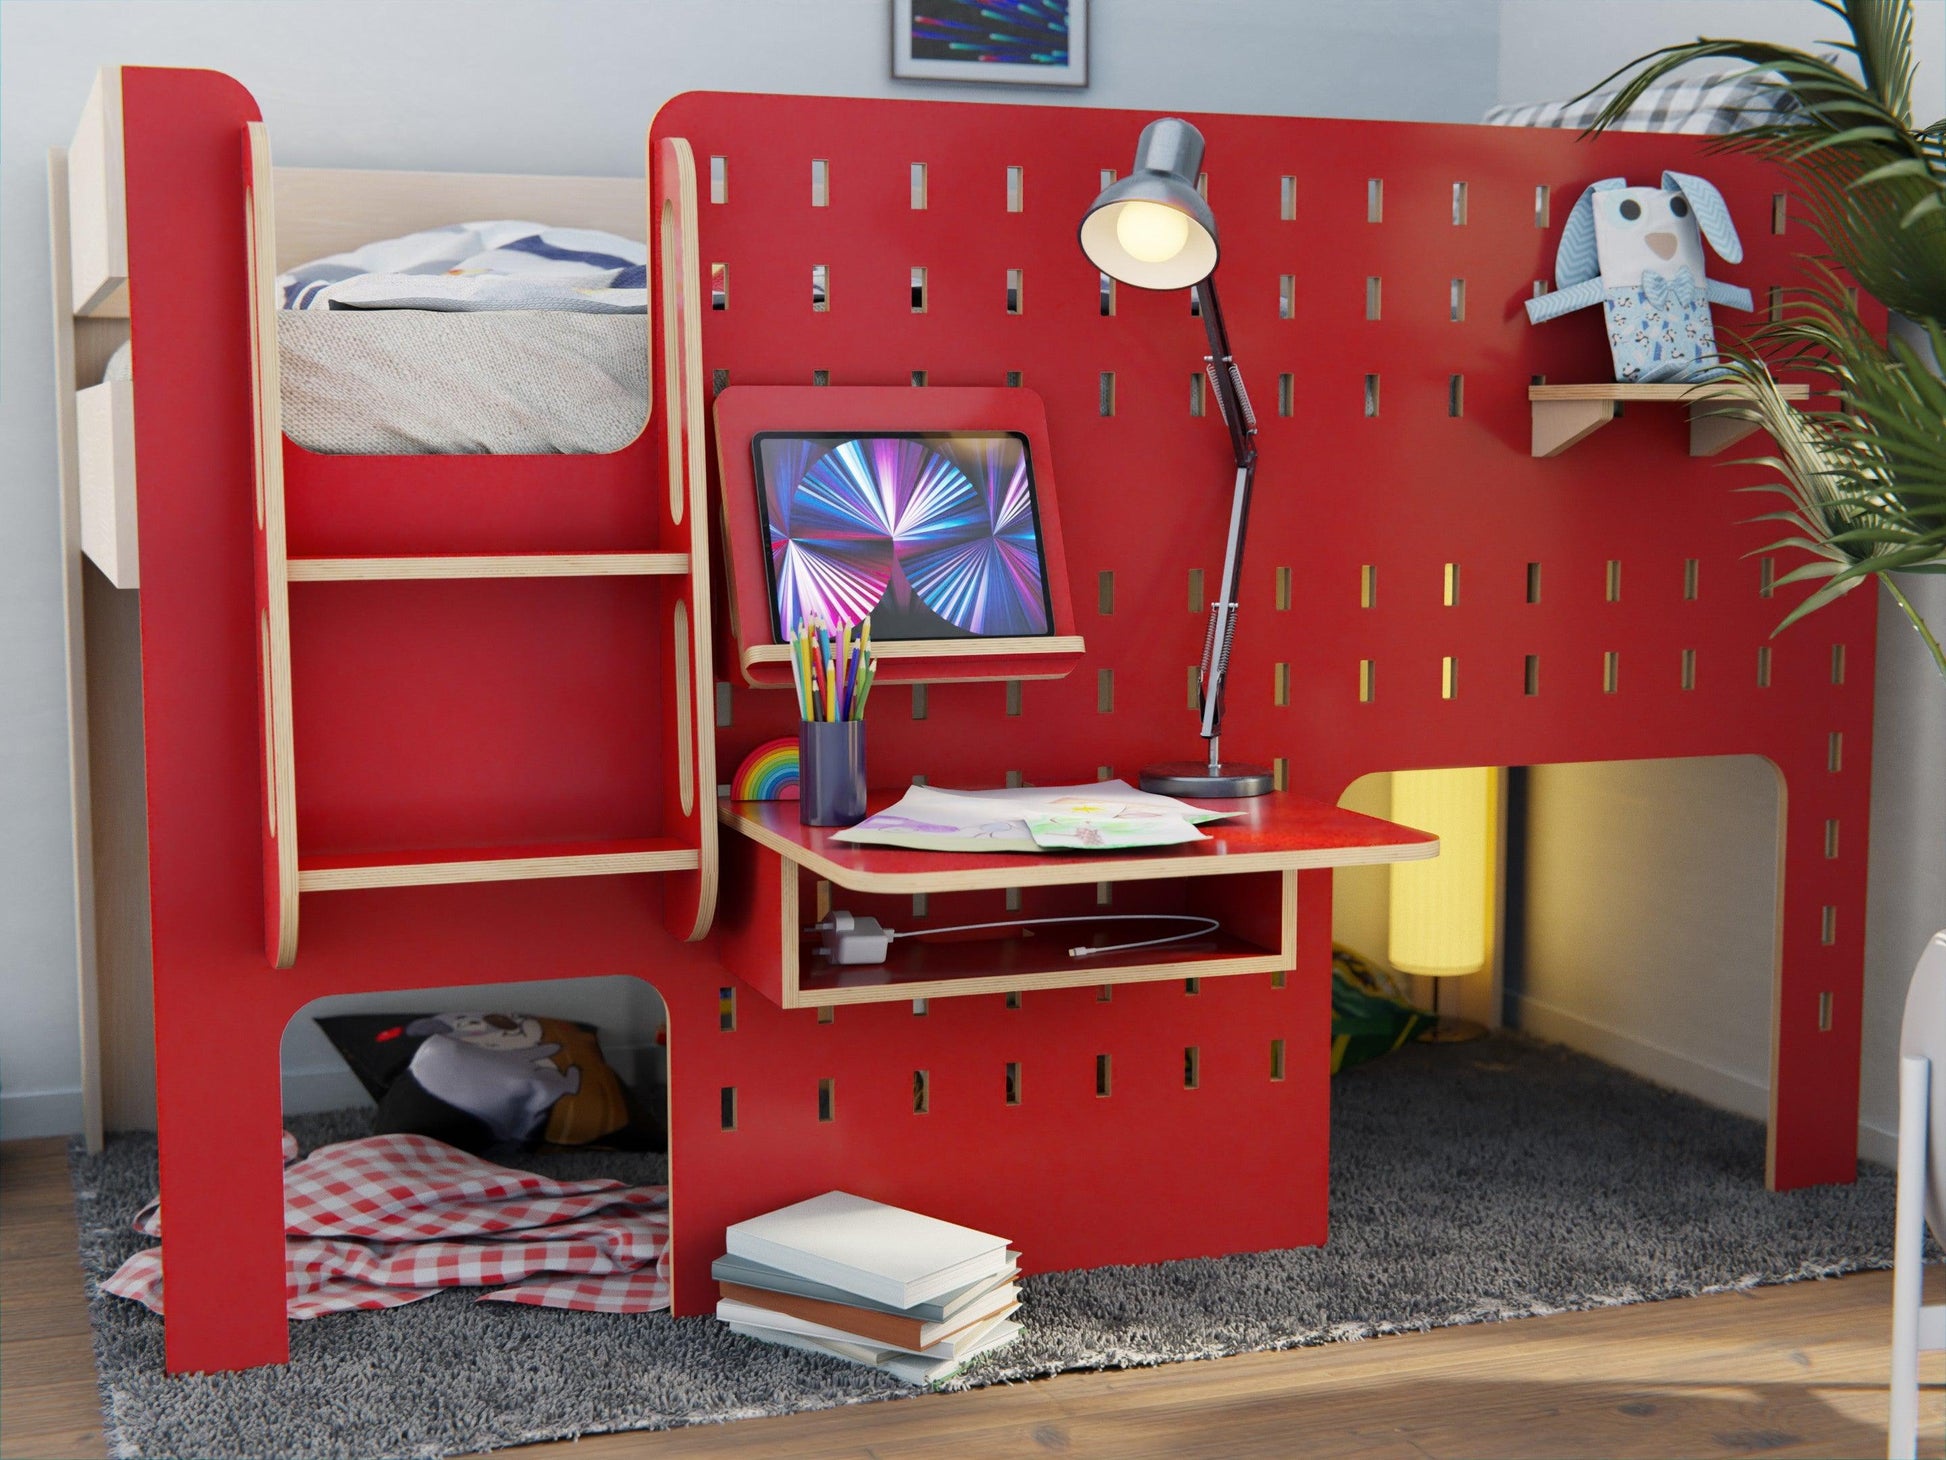 Maximise space without compromising on style with our innovative wooden low loft bed, featuring a cozy sleeping area and a functional study desk.